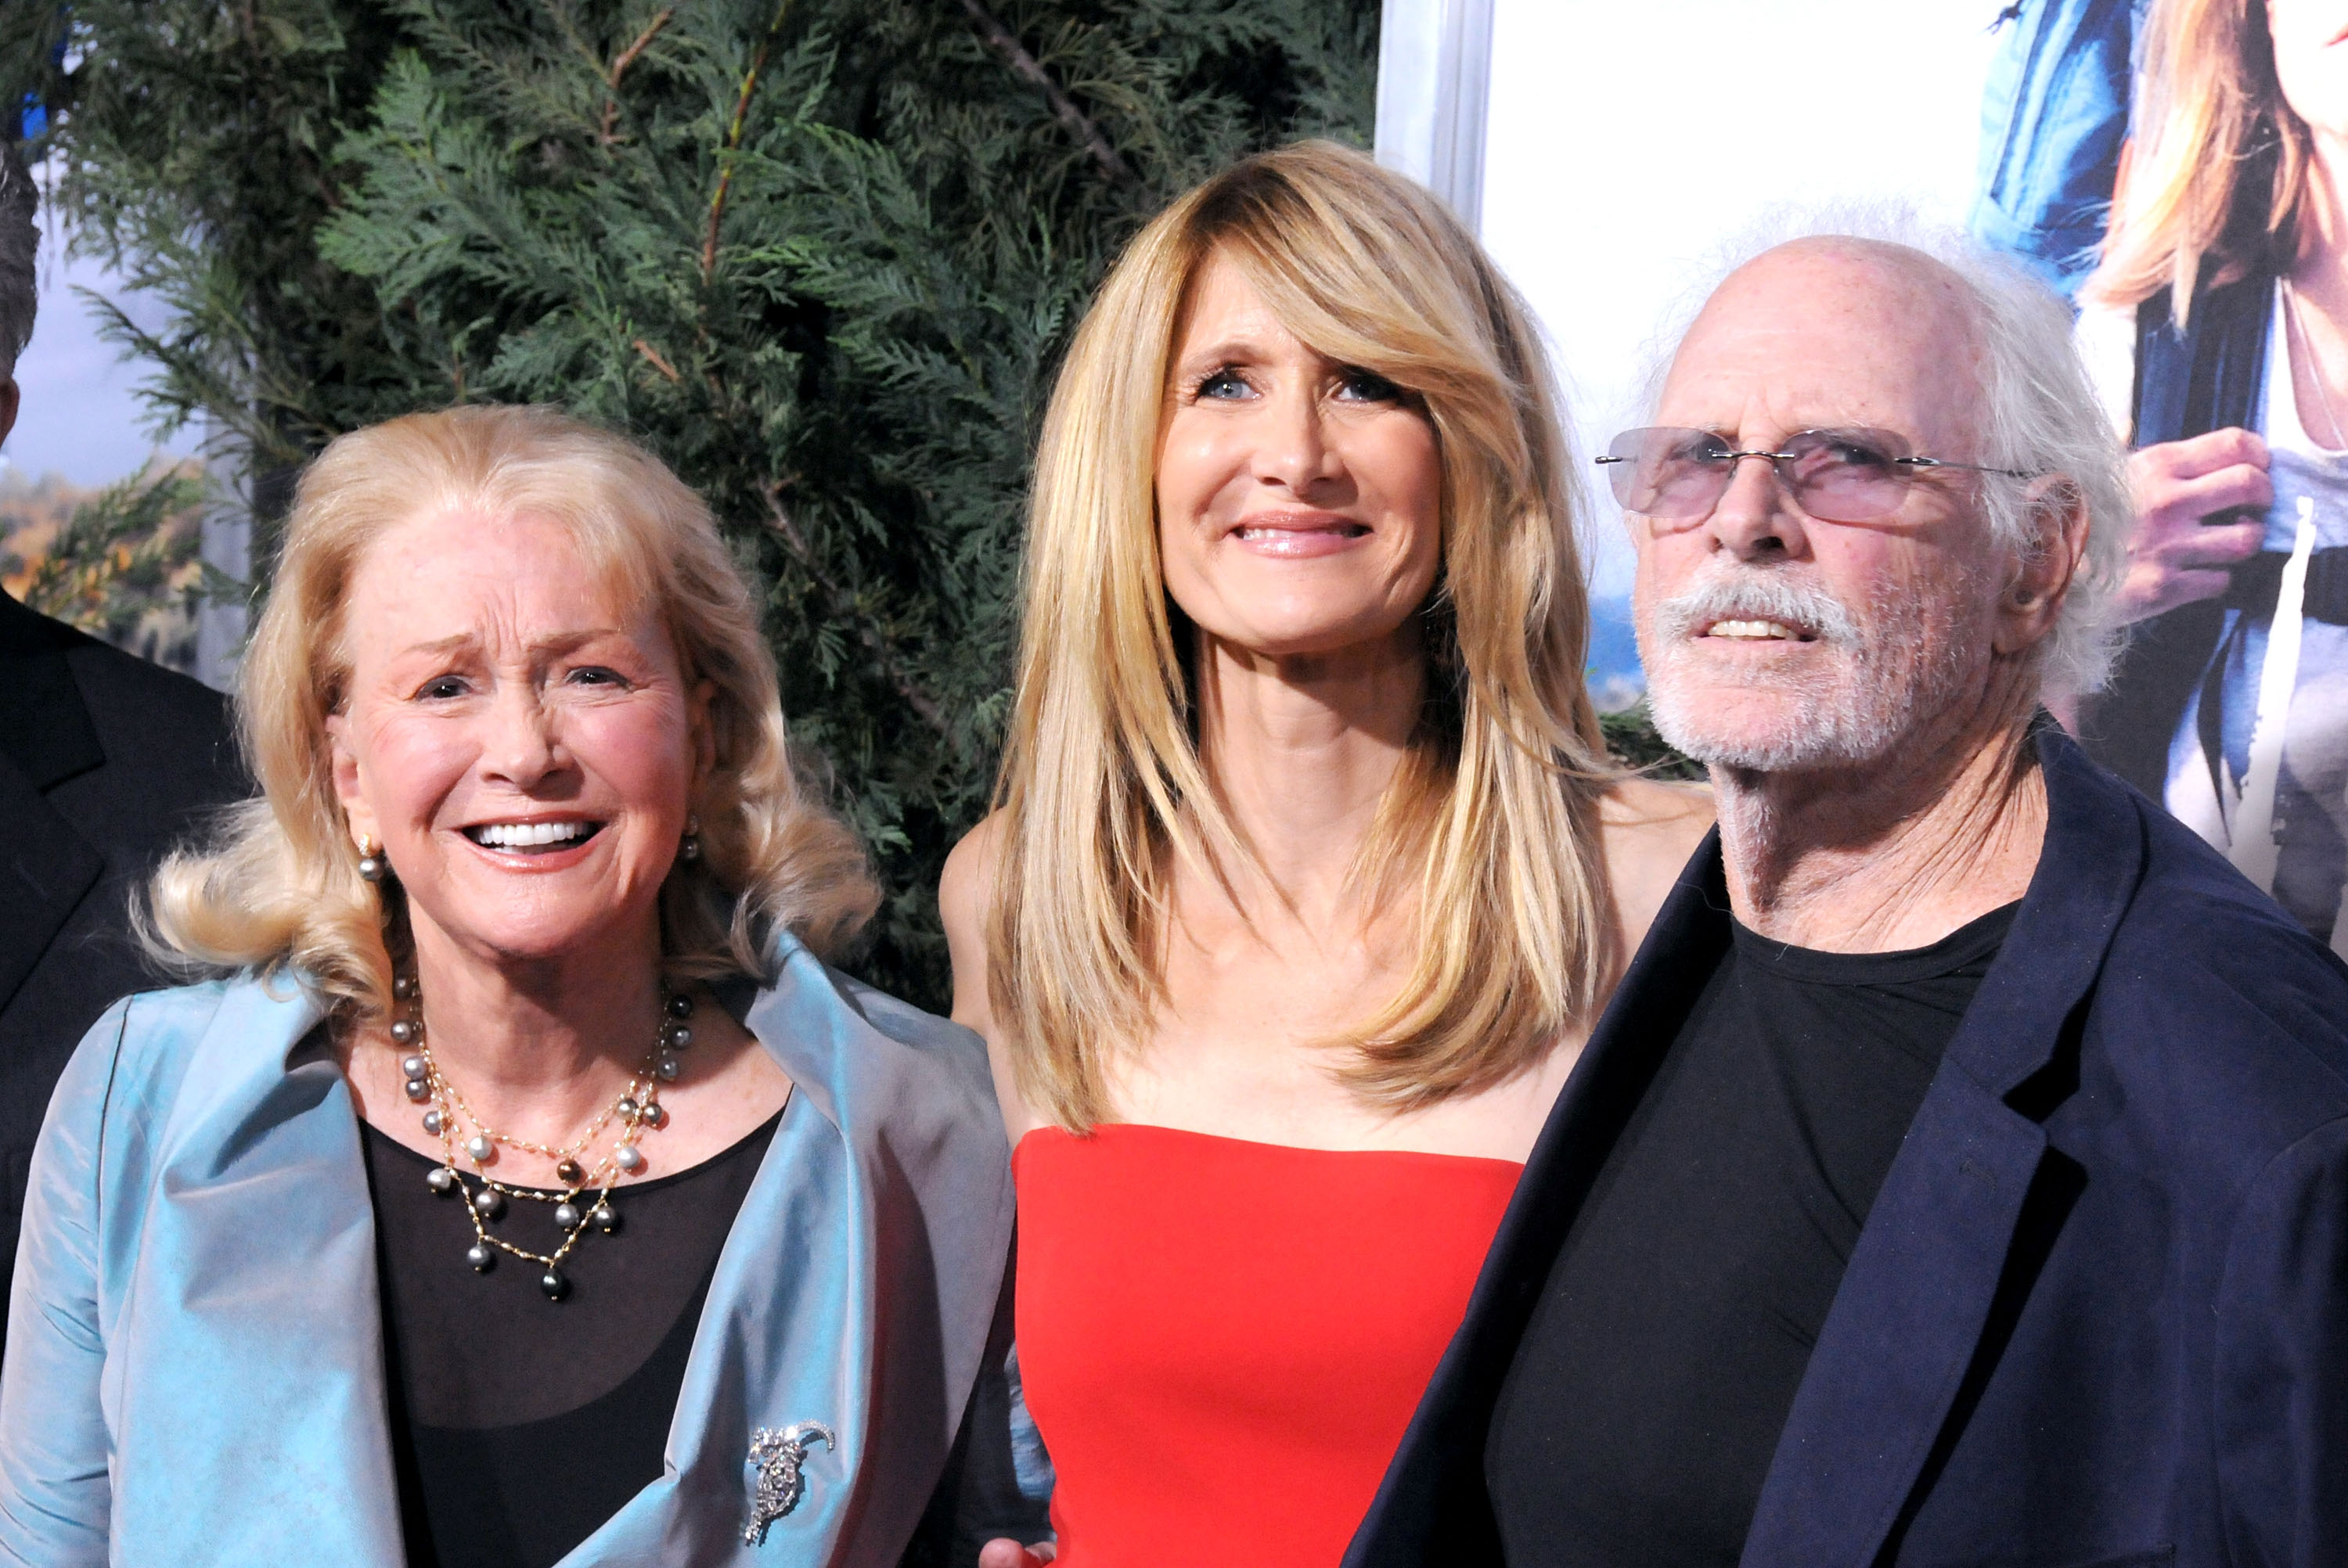 Diane Ladd, Laura Dern and Bruce Dern arrive at the Los Angeles premiere of "Wild" on November 19, 2014 in Beverly Hills, California. | Source: Getty Images